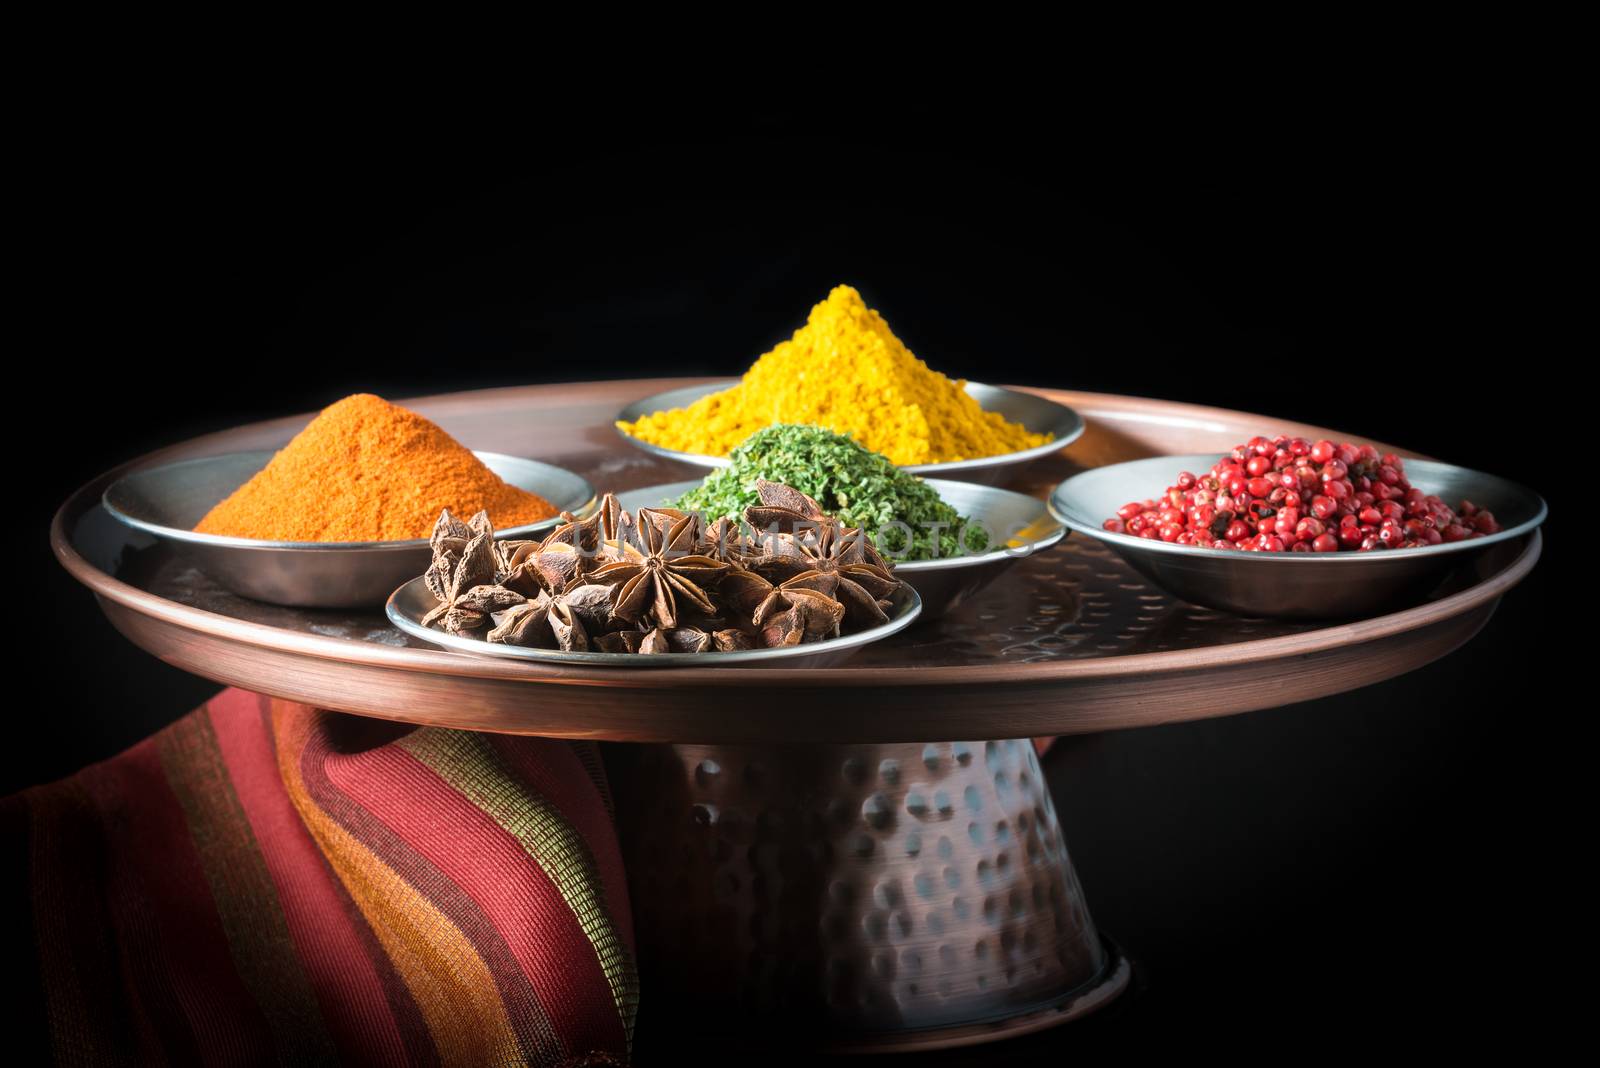 Five Colorful Spices by billberryphotography